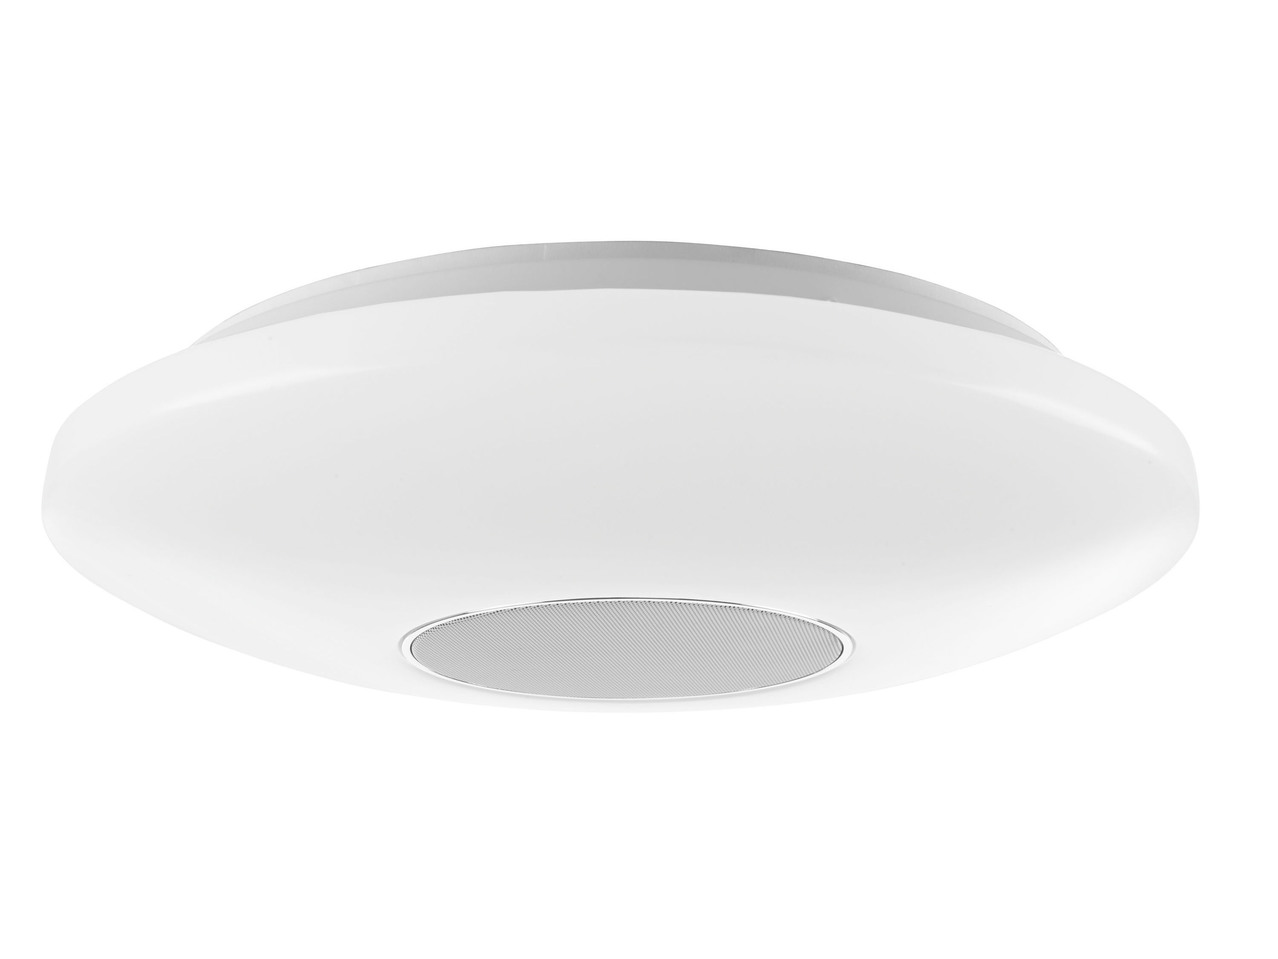 LED Ceiling Light with Bluetooth Speaker